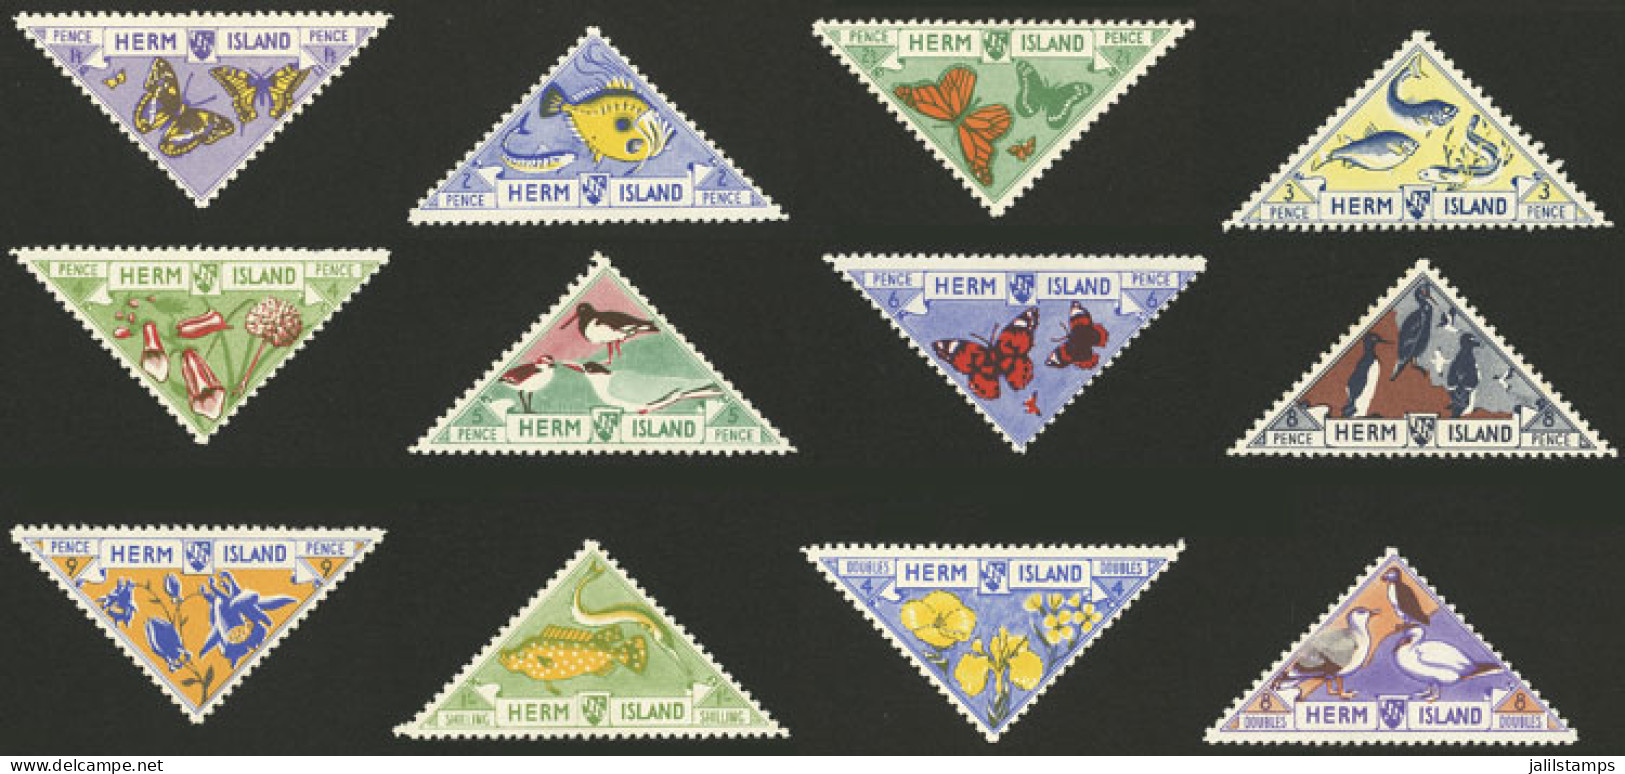 GREAT BRITAIN: HERM ISLAND: Fauna, Set Of 12 Triangular Values, Mint Without Gum, Fine Quality, Very Nice! - Vignetten (Erinnophilie)